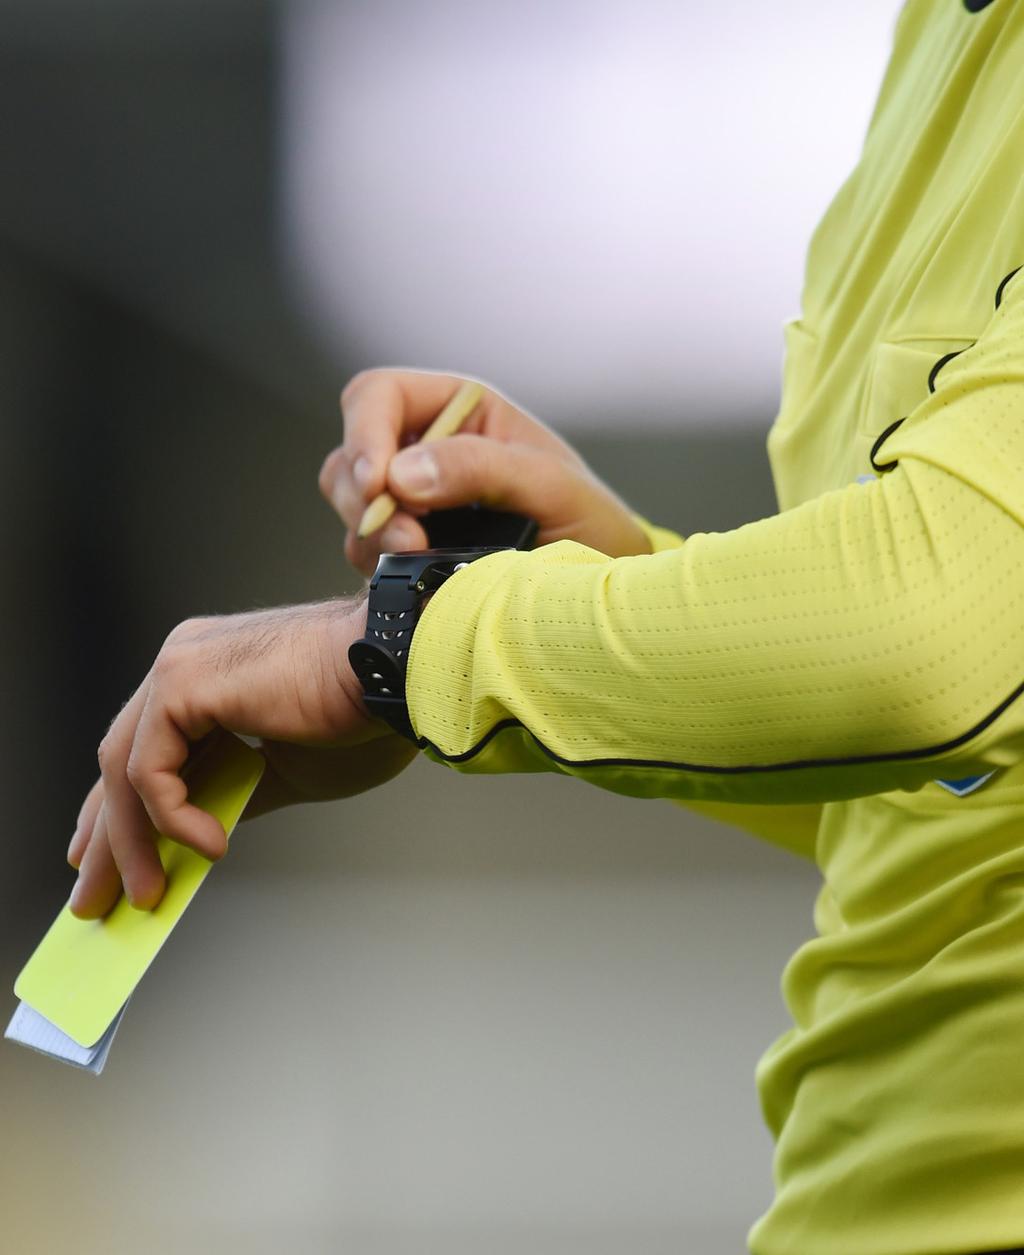 LAW 6 THE ADDITIONAL MATCH OFFICIAL Duties The duties of the additional match official are to assist the referee in controlling the match in accordance with the Laws of the Game in the following